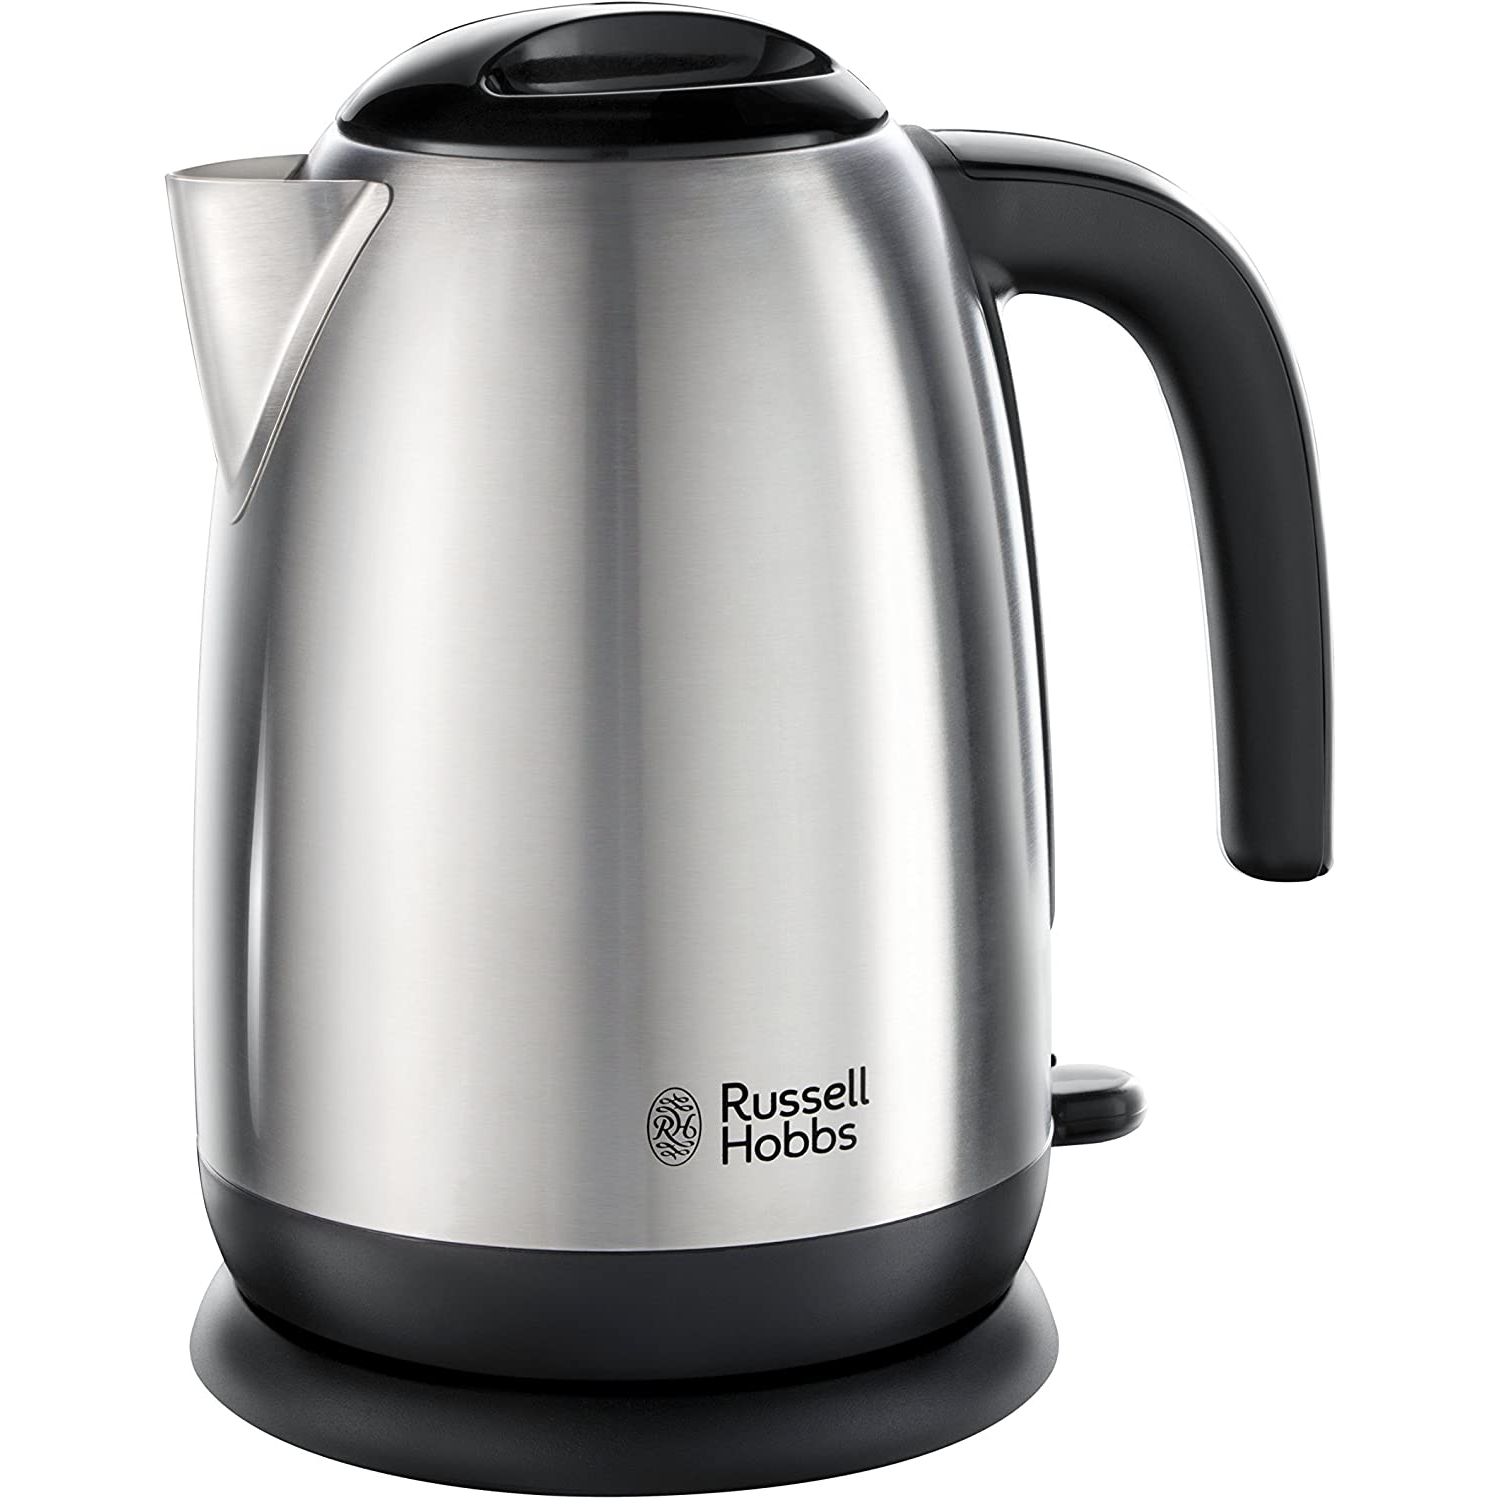 Attards Household goods & Appliances - Russell Hobbs Electric kettle  Stainless Steel Back in Stock :) For only €49.90 2 Years Guarantee & FREE  DELIVERY ATTARDS HOUSEHOLD Visit us in High street